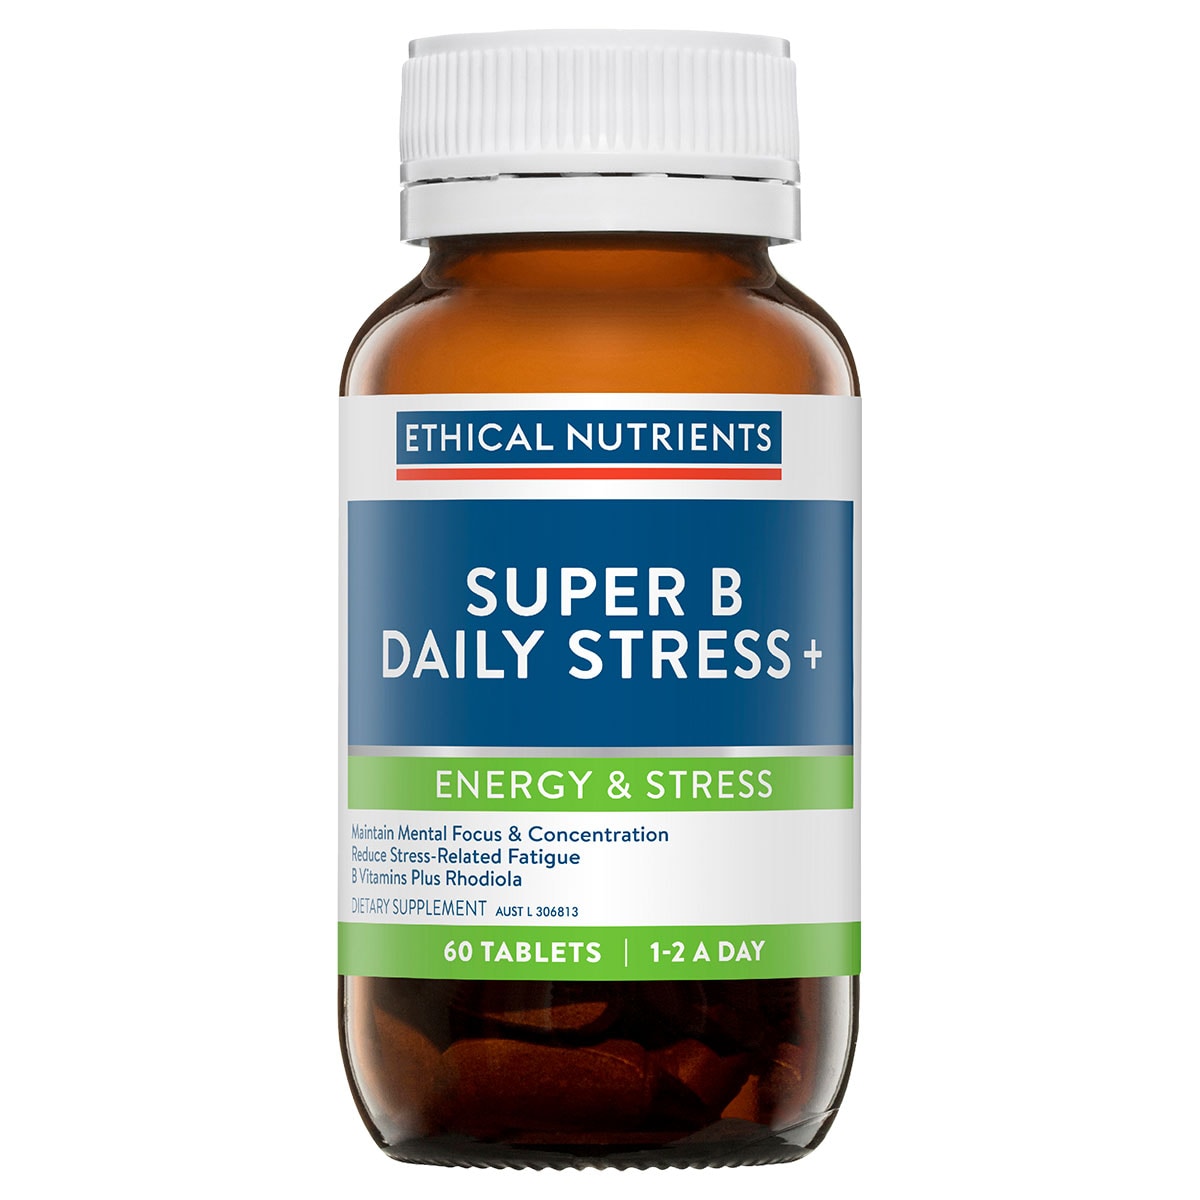 Ethical Nutrients Super B Daily Stress+ 60 Tablets Australia